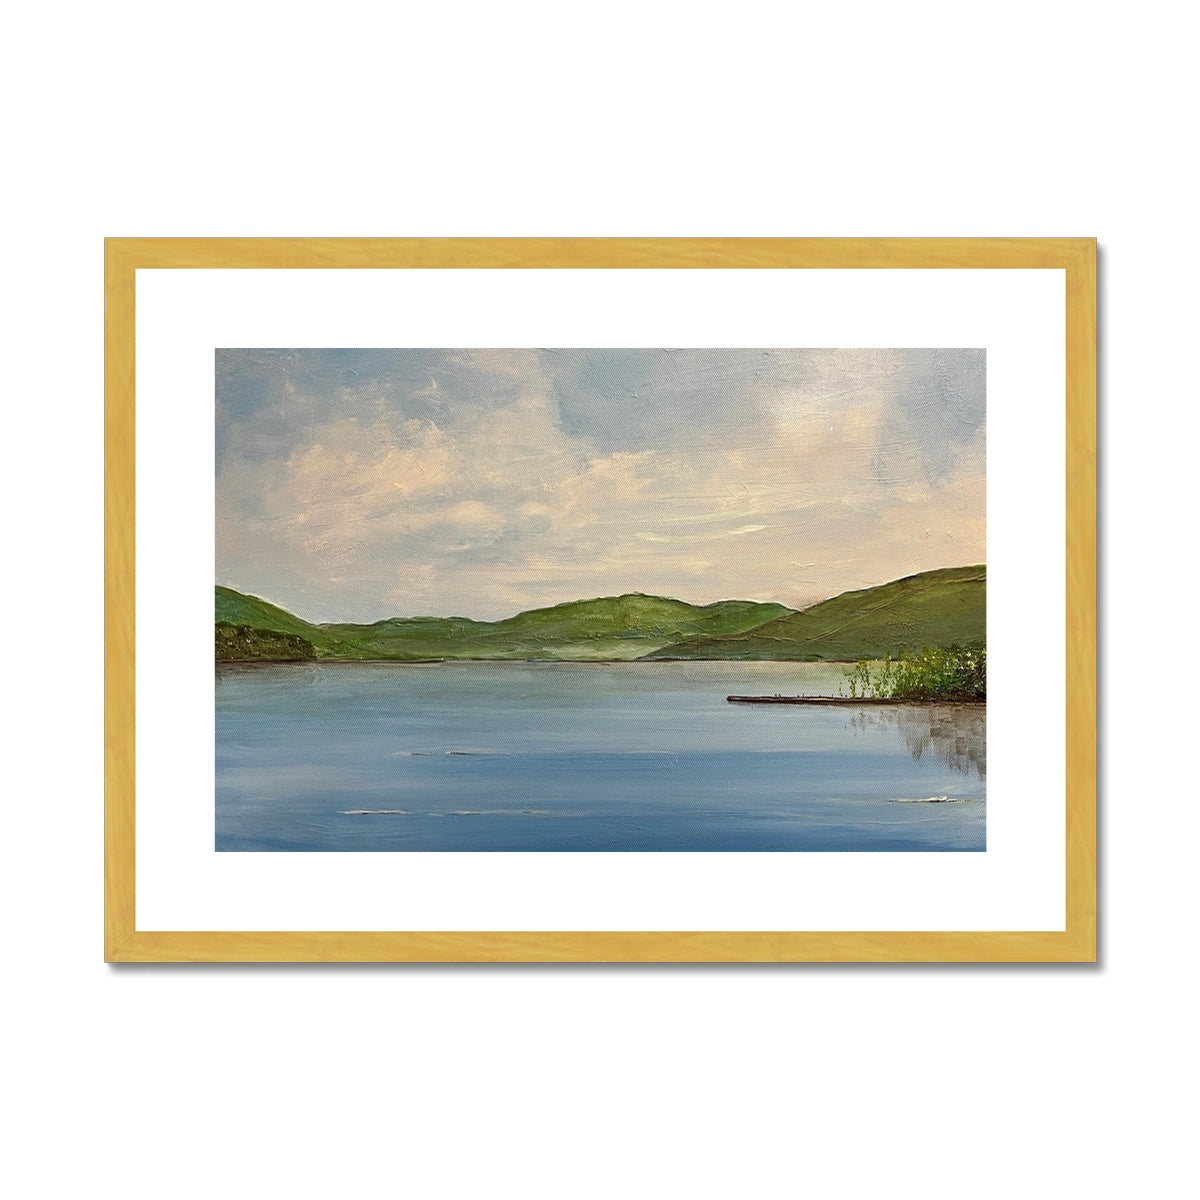 Loch Tay ii Painting | Antique Framed & Mounted Prints From Scotland-Antique Framed & Mounted Prints-Scottish Lochs & Mountains Art Gallery-A2 Landscape-Gold Frame-Paintings, Prints, Homeware, Art Gifts From Scotland By Scottish Artist Kevin Hunter